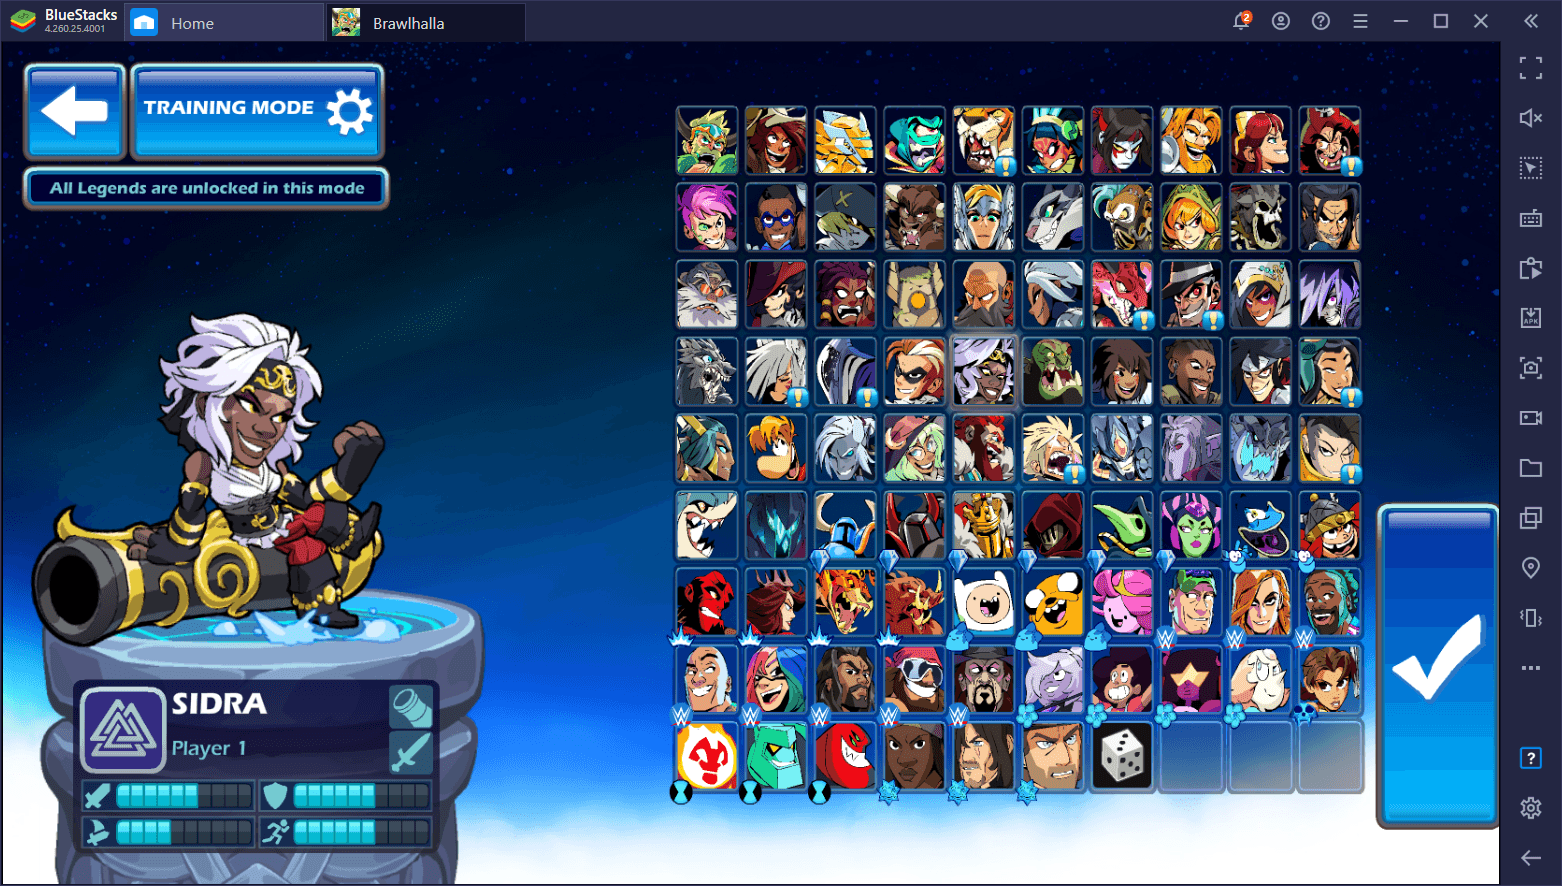 Brawlhalla Weapons Guide - An Overview of the Different Weapons and Their Matchups